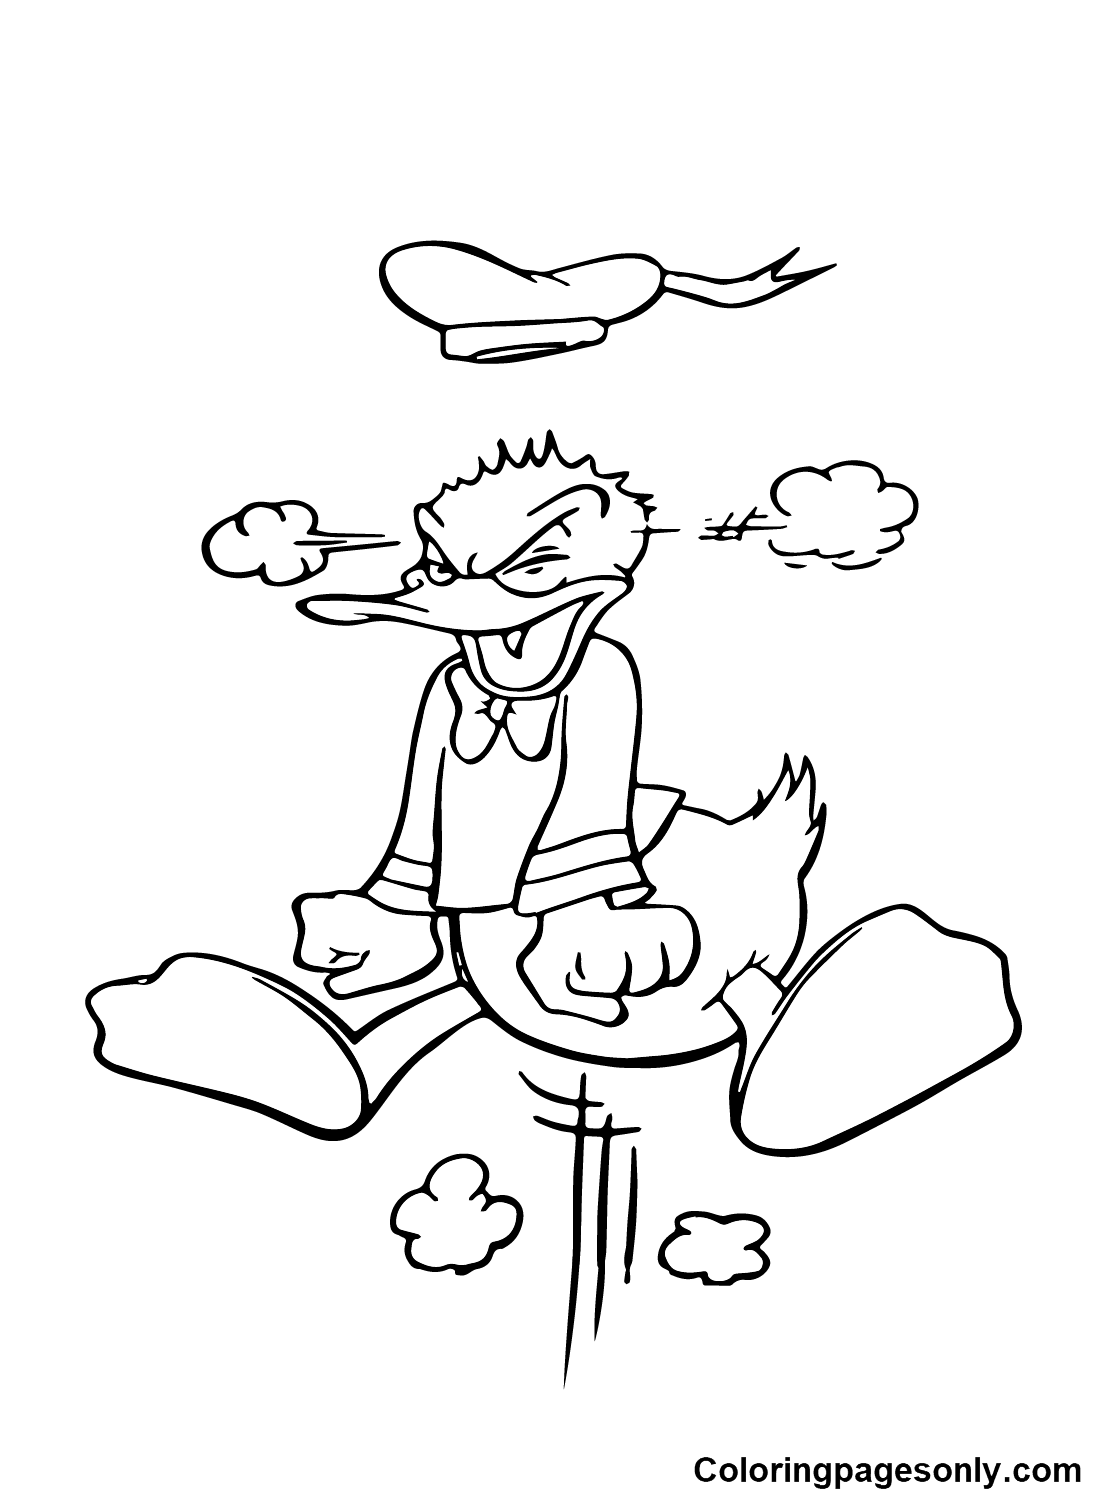 Funny Donald Duck Kingdom Hearts Coloring Page